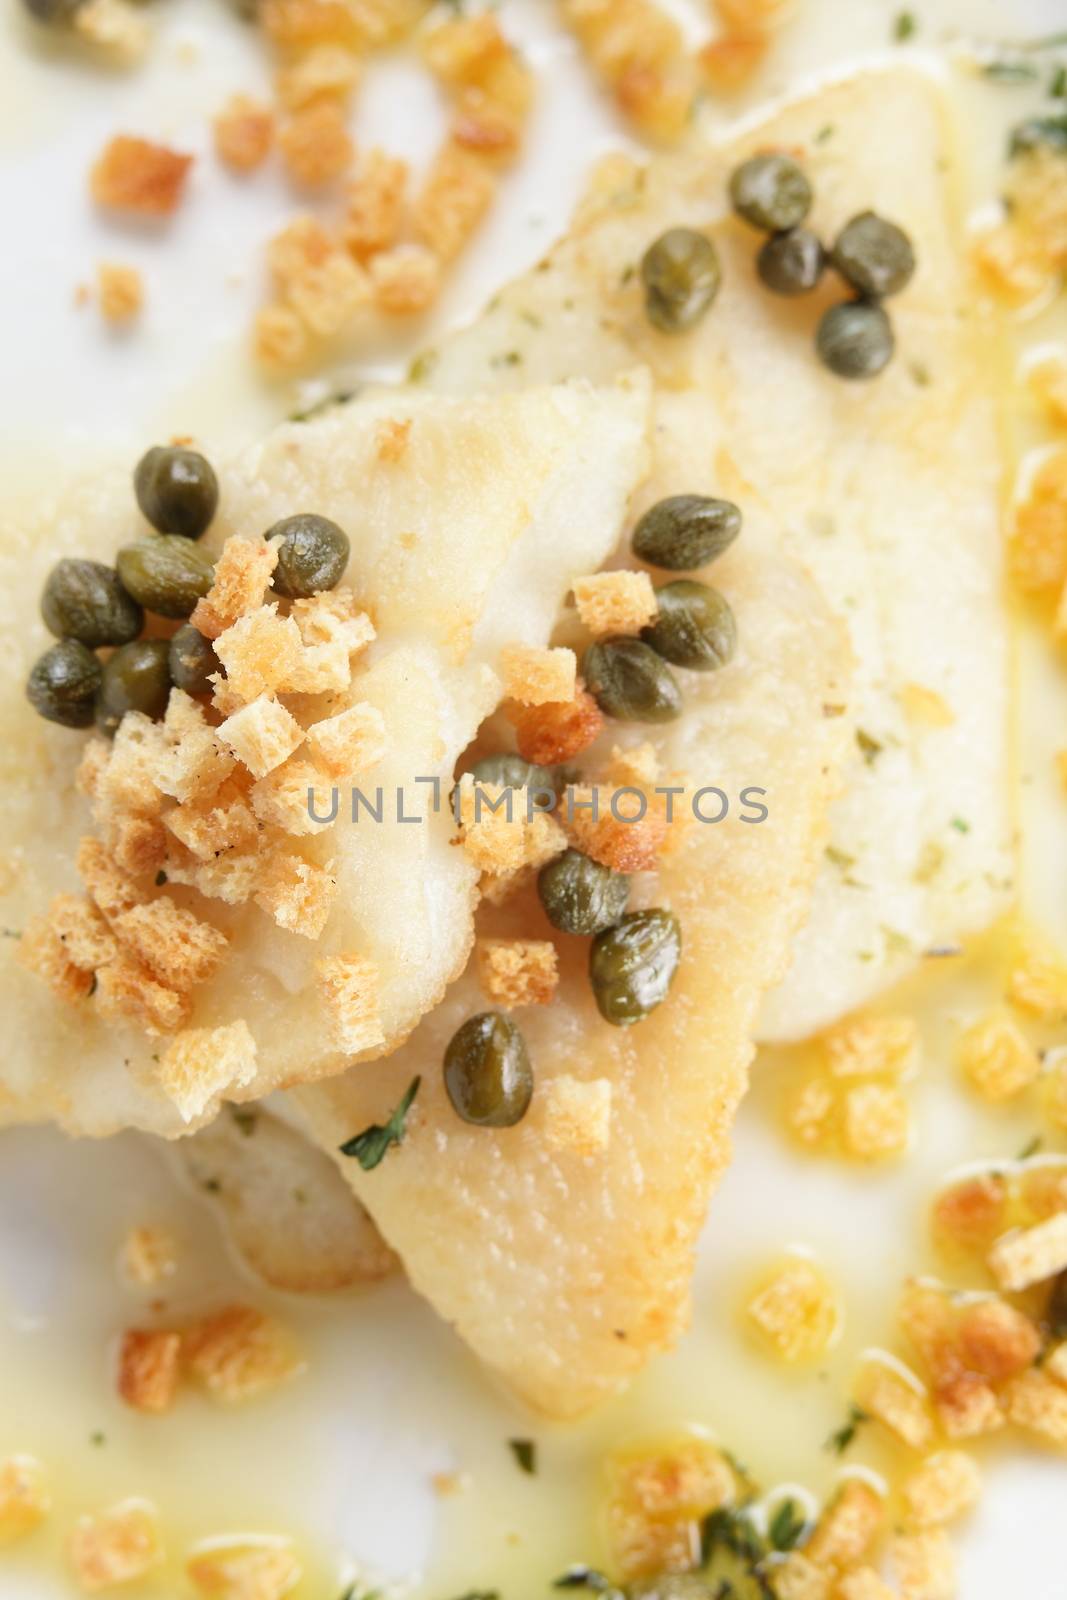 roasted peaces of fish with garnish on white background